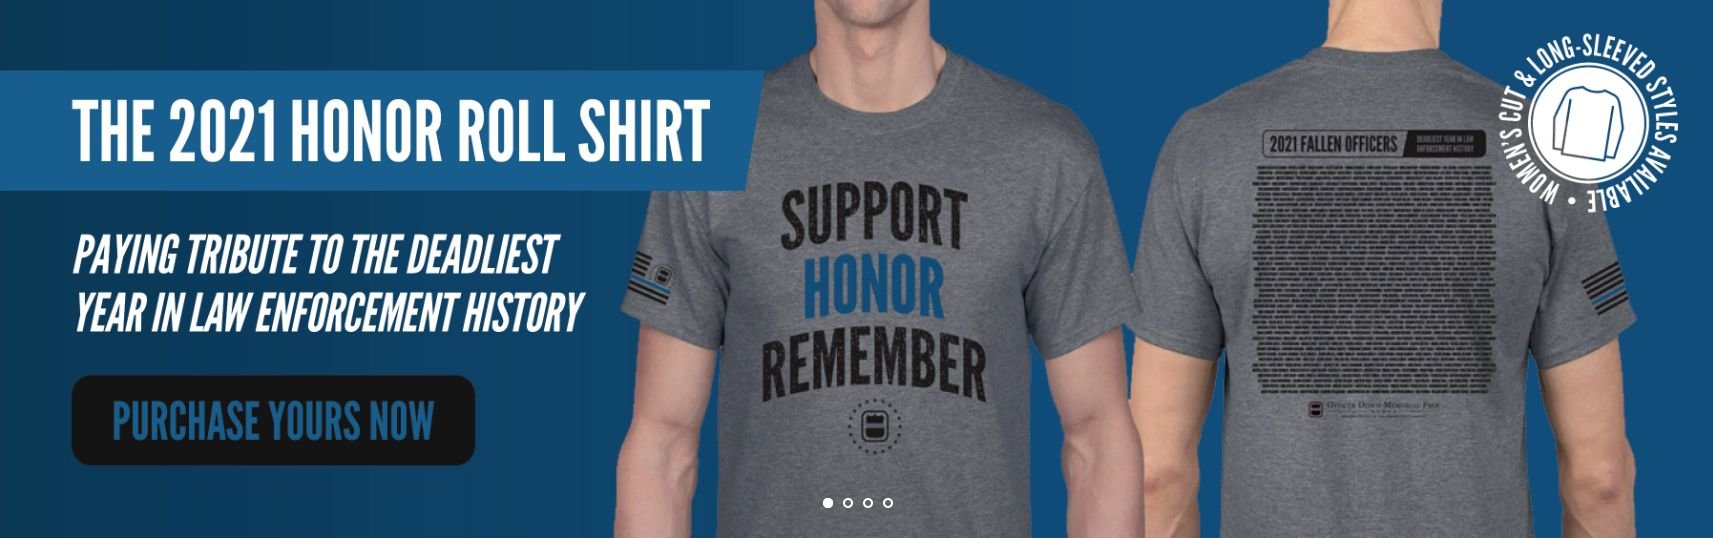 officer down memorial page, holiday gift guide